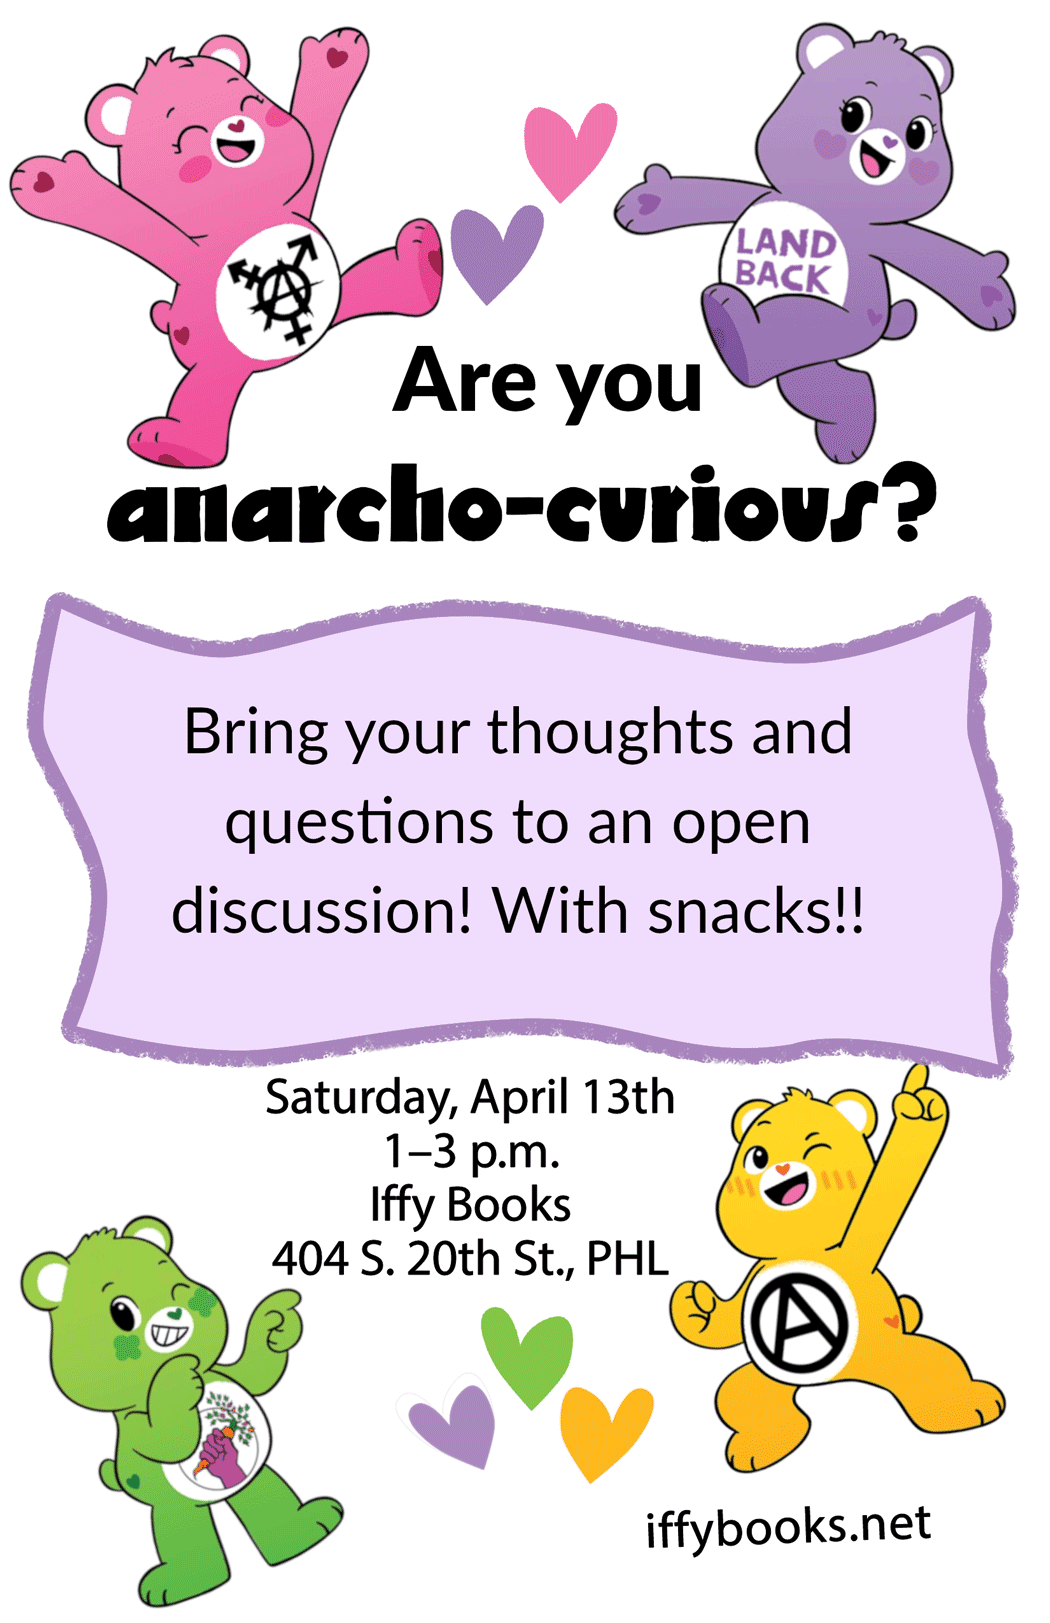 Flyer with Care Bear characters with anarchy-related symbols on their bellies, allong with the following text: Are you anarcho-curious? / Bring your thoughts and questions to an open discussion! With snacks!! / Saturday, April 13th / 1–3 p.m. / Iffy Books / 404 S. 20th St., PHL / iffybooks.net